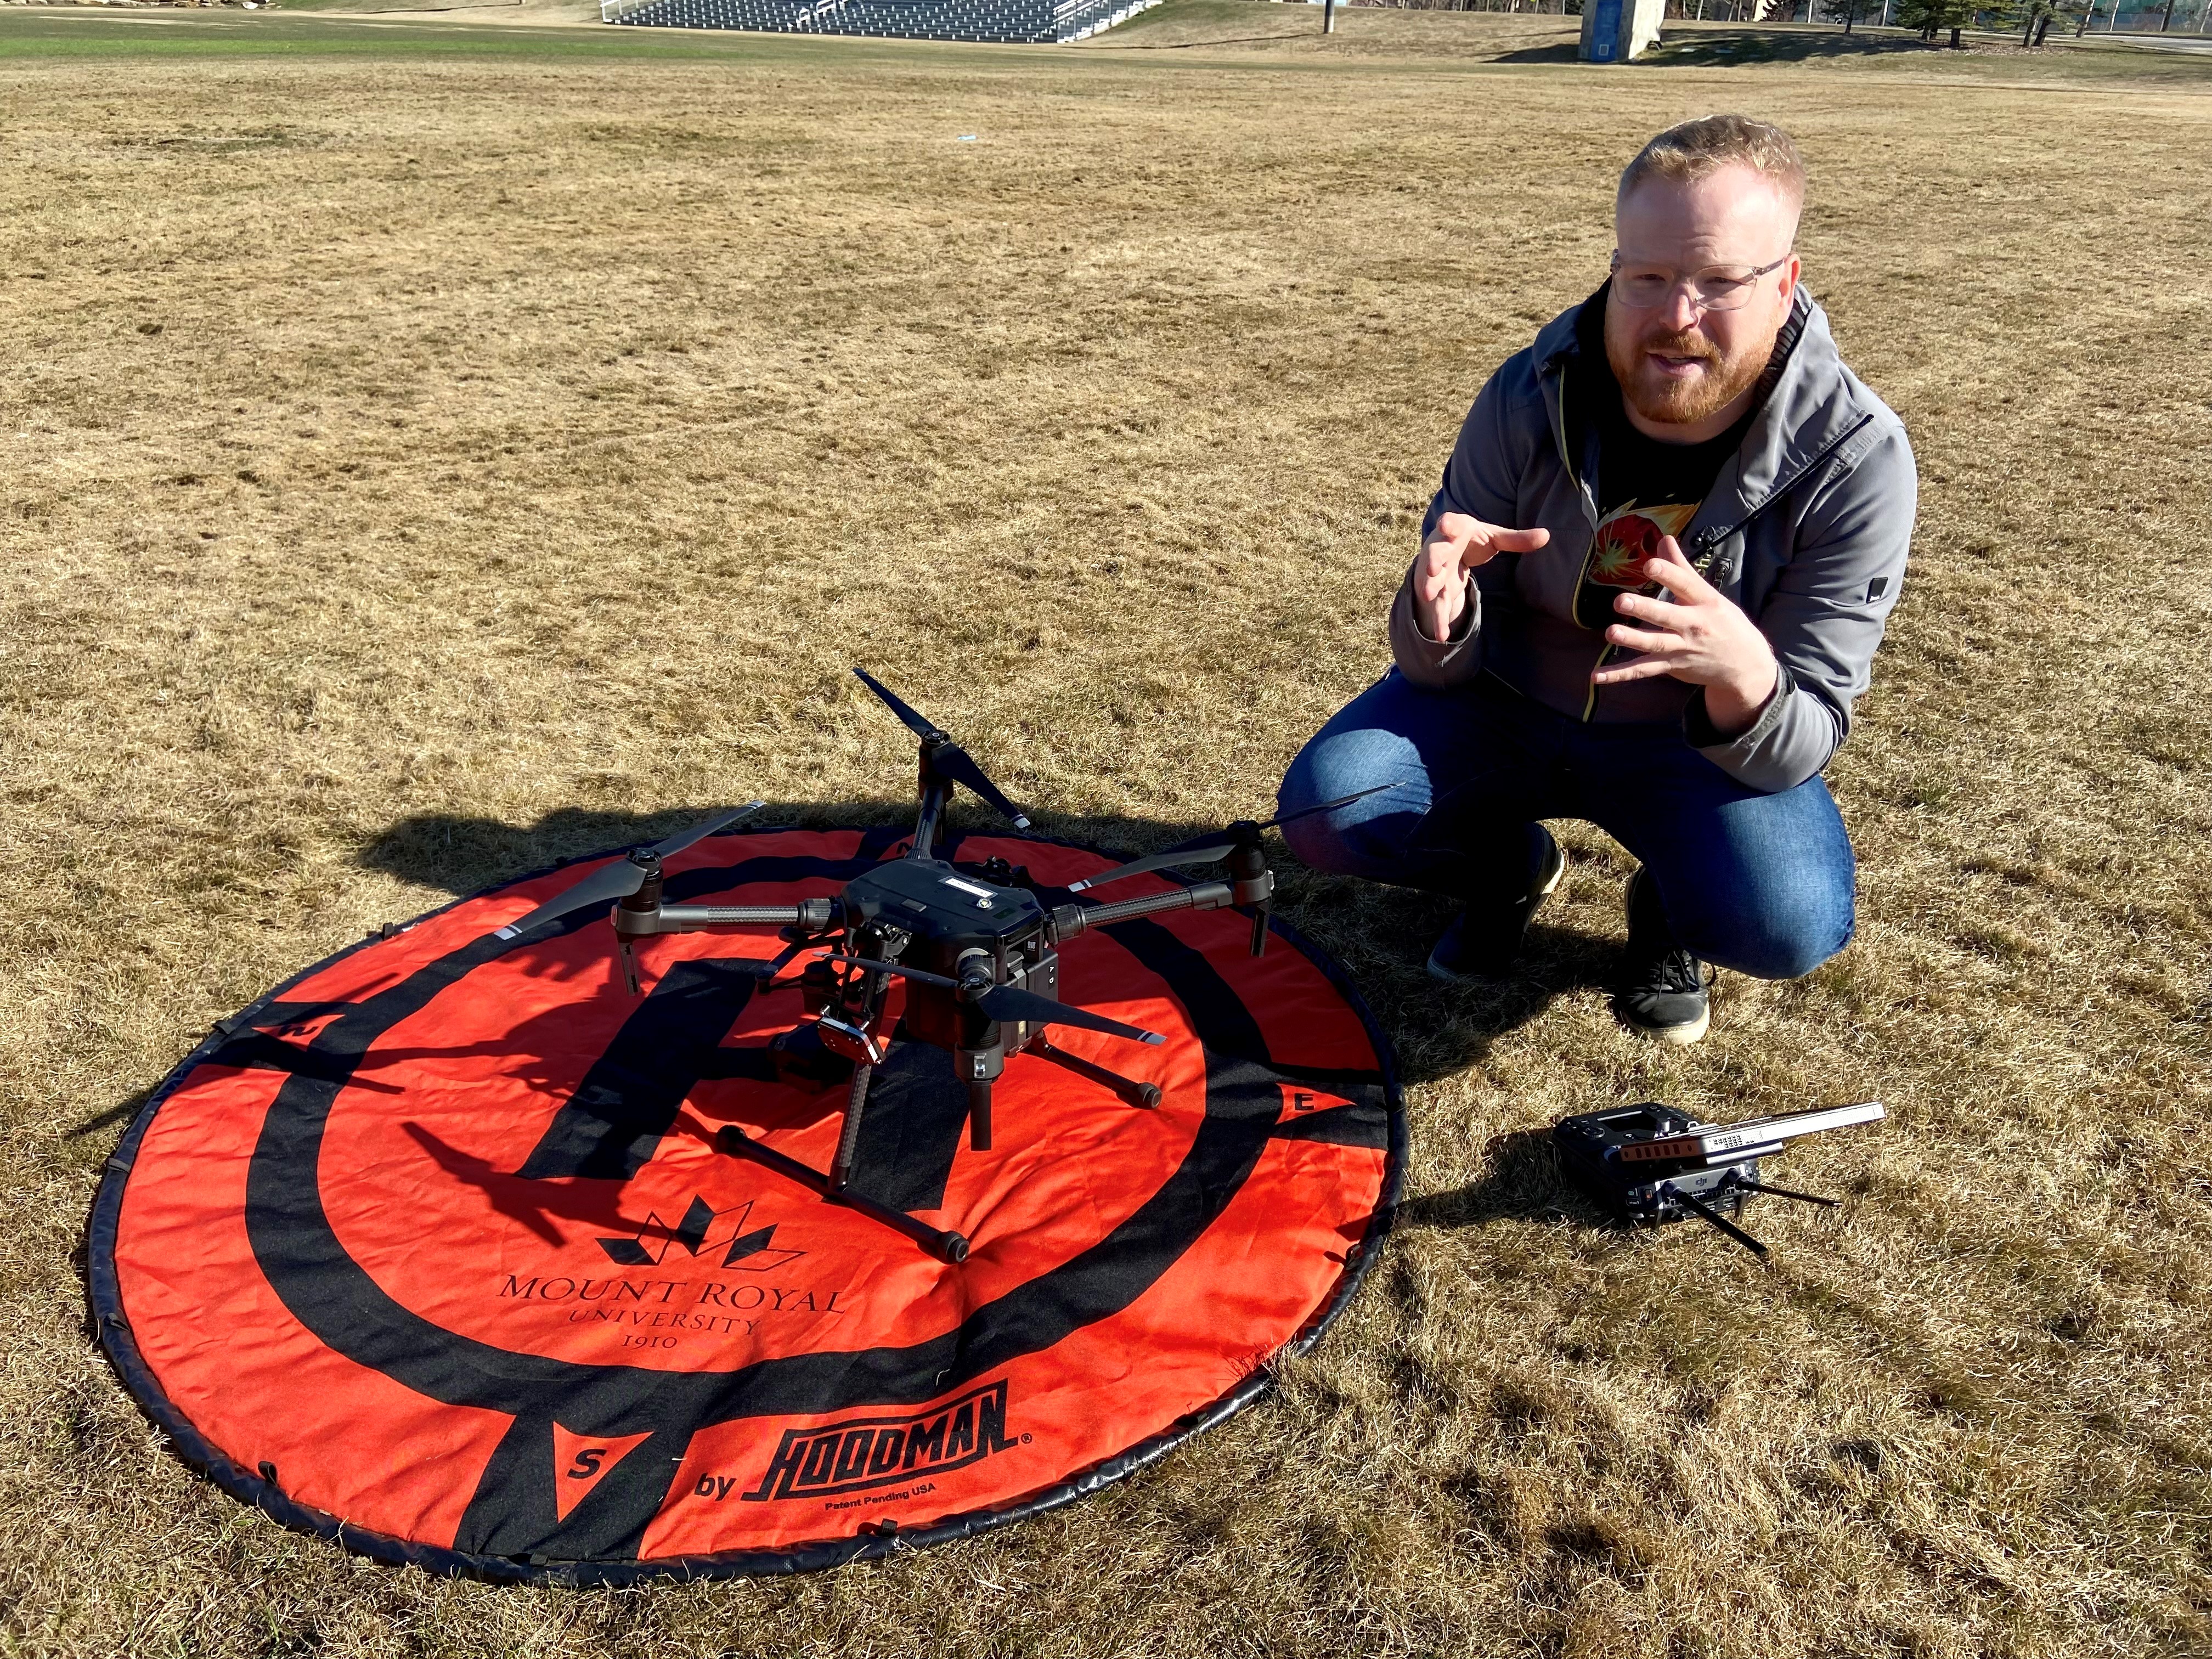 Calgary lab utilizes drones to better understand wildfires